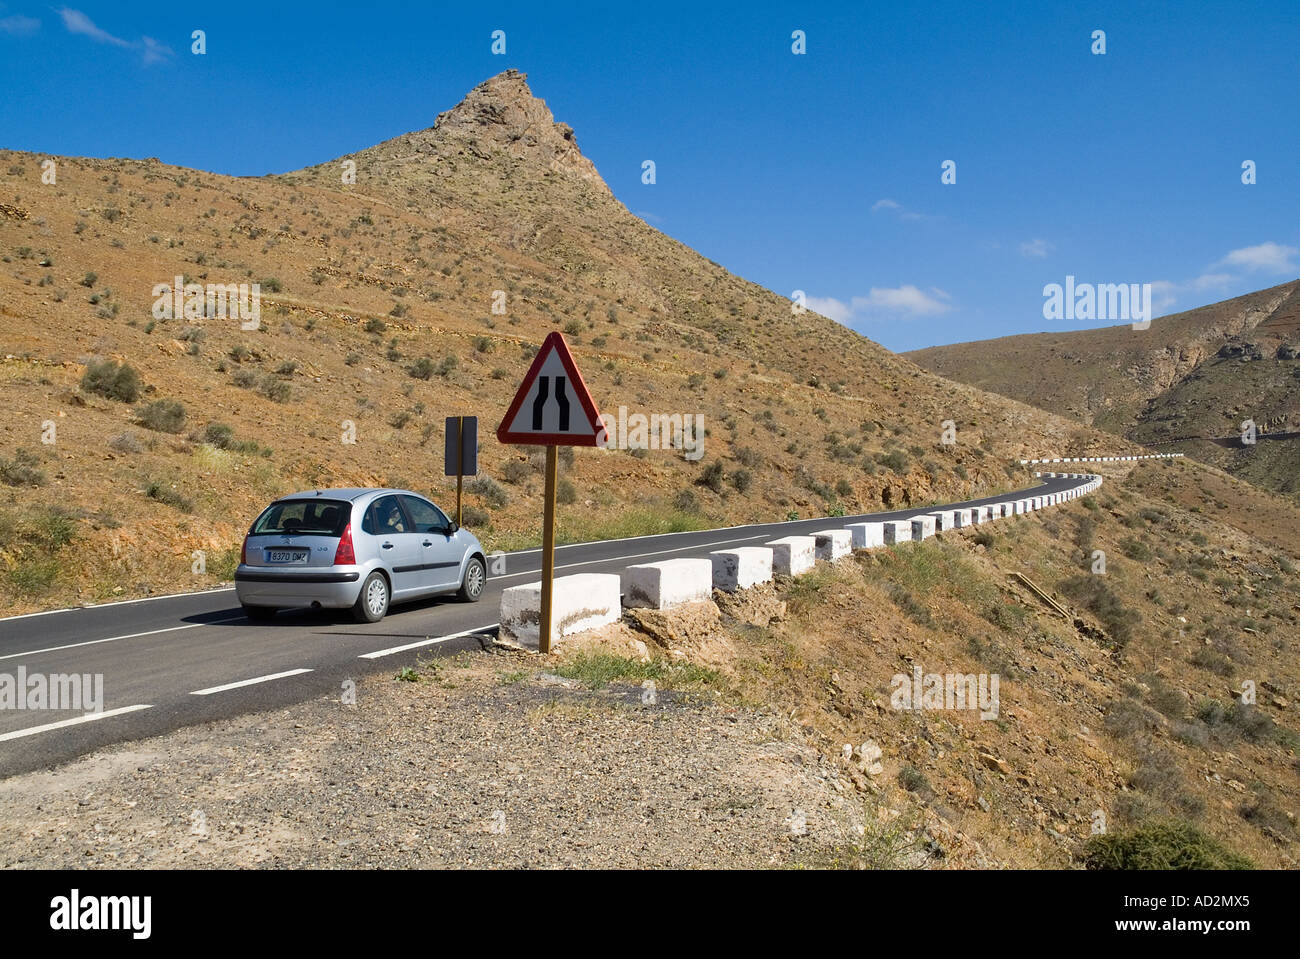 dh  BETANCURIA AREA FUERTEVENTURA Tourist hired car travelling along mountaineous hillside roads sightseer road Stock Photo